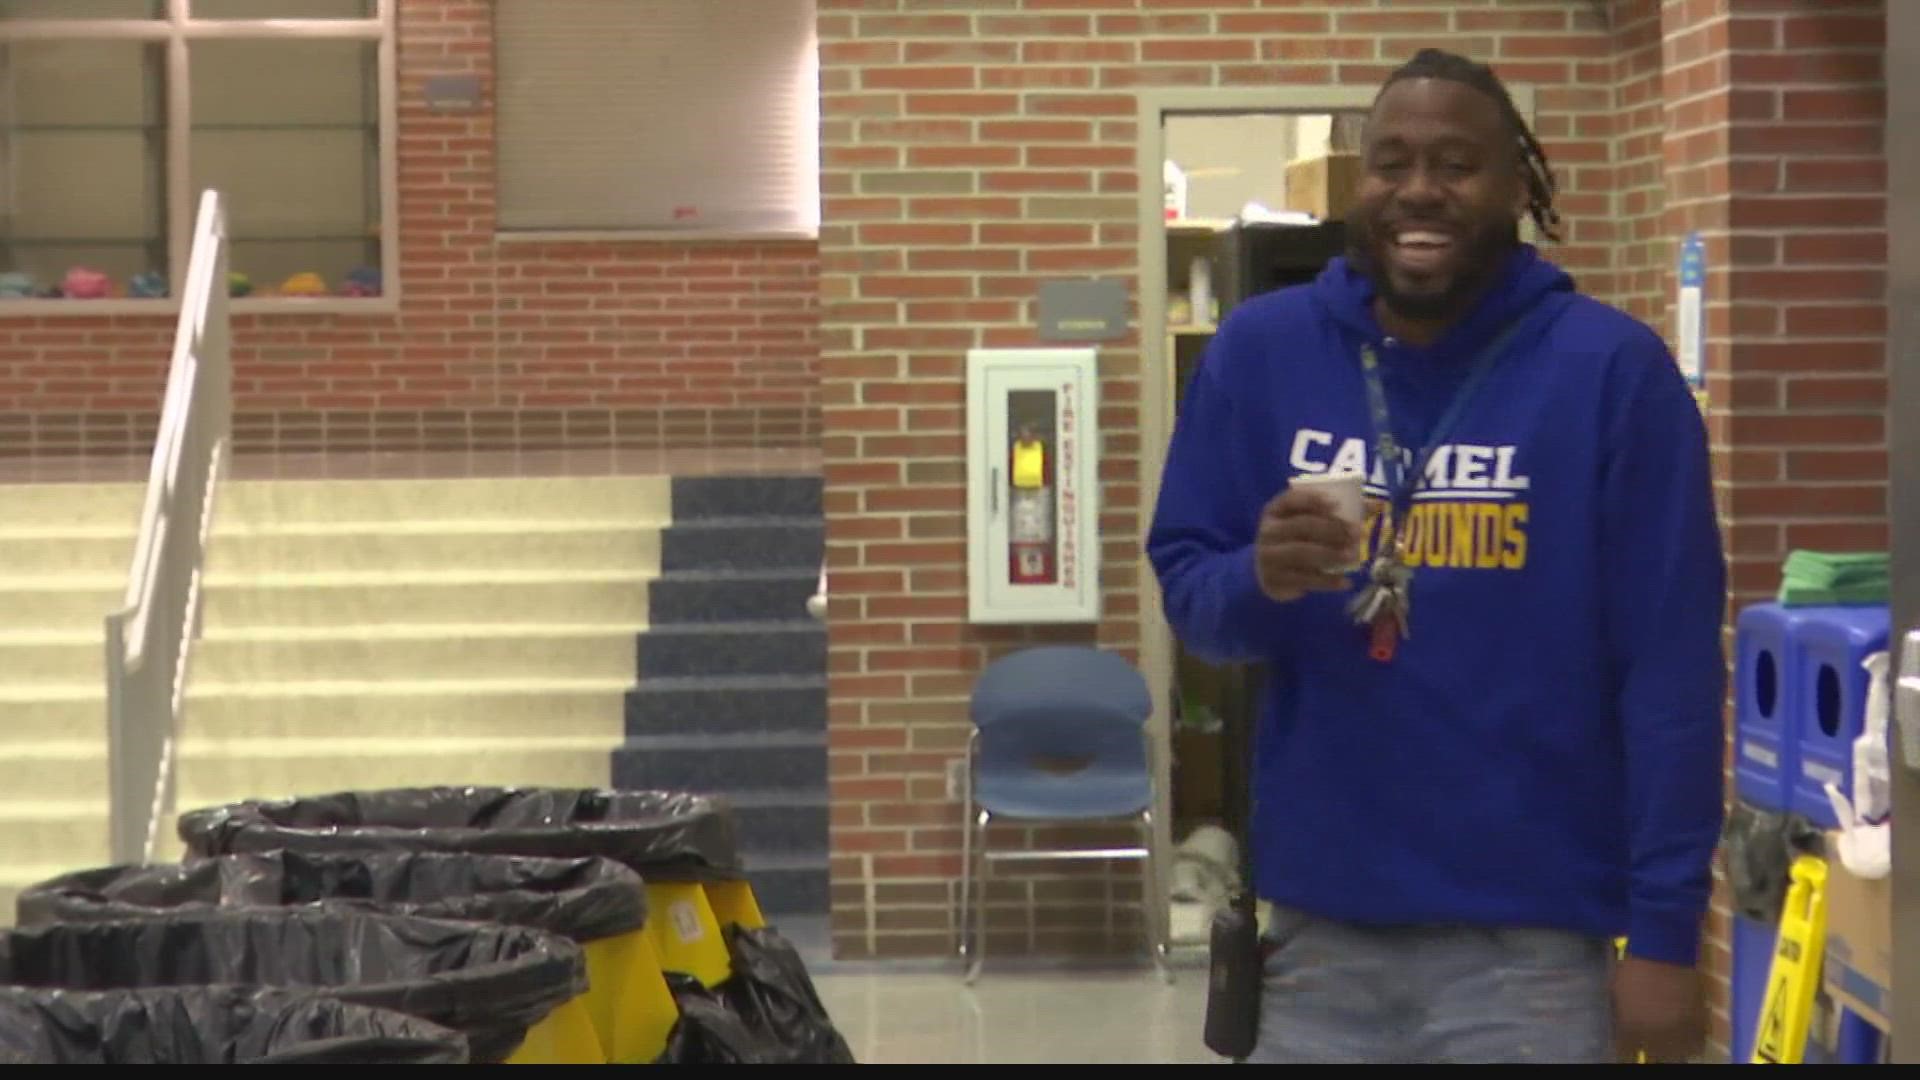 The Carmel custodian is known for his smile and positivity.